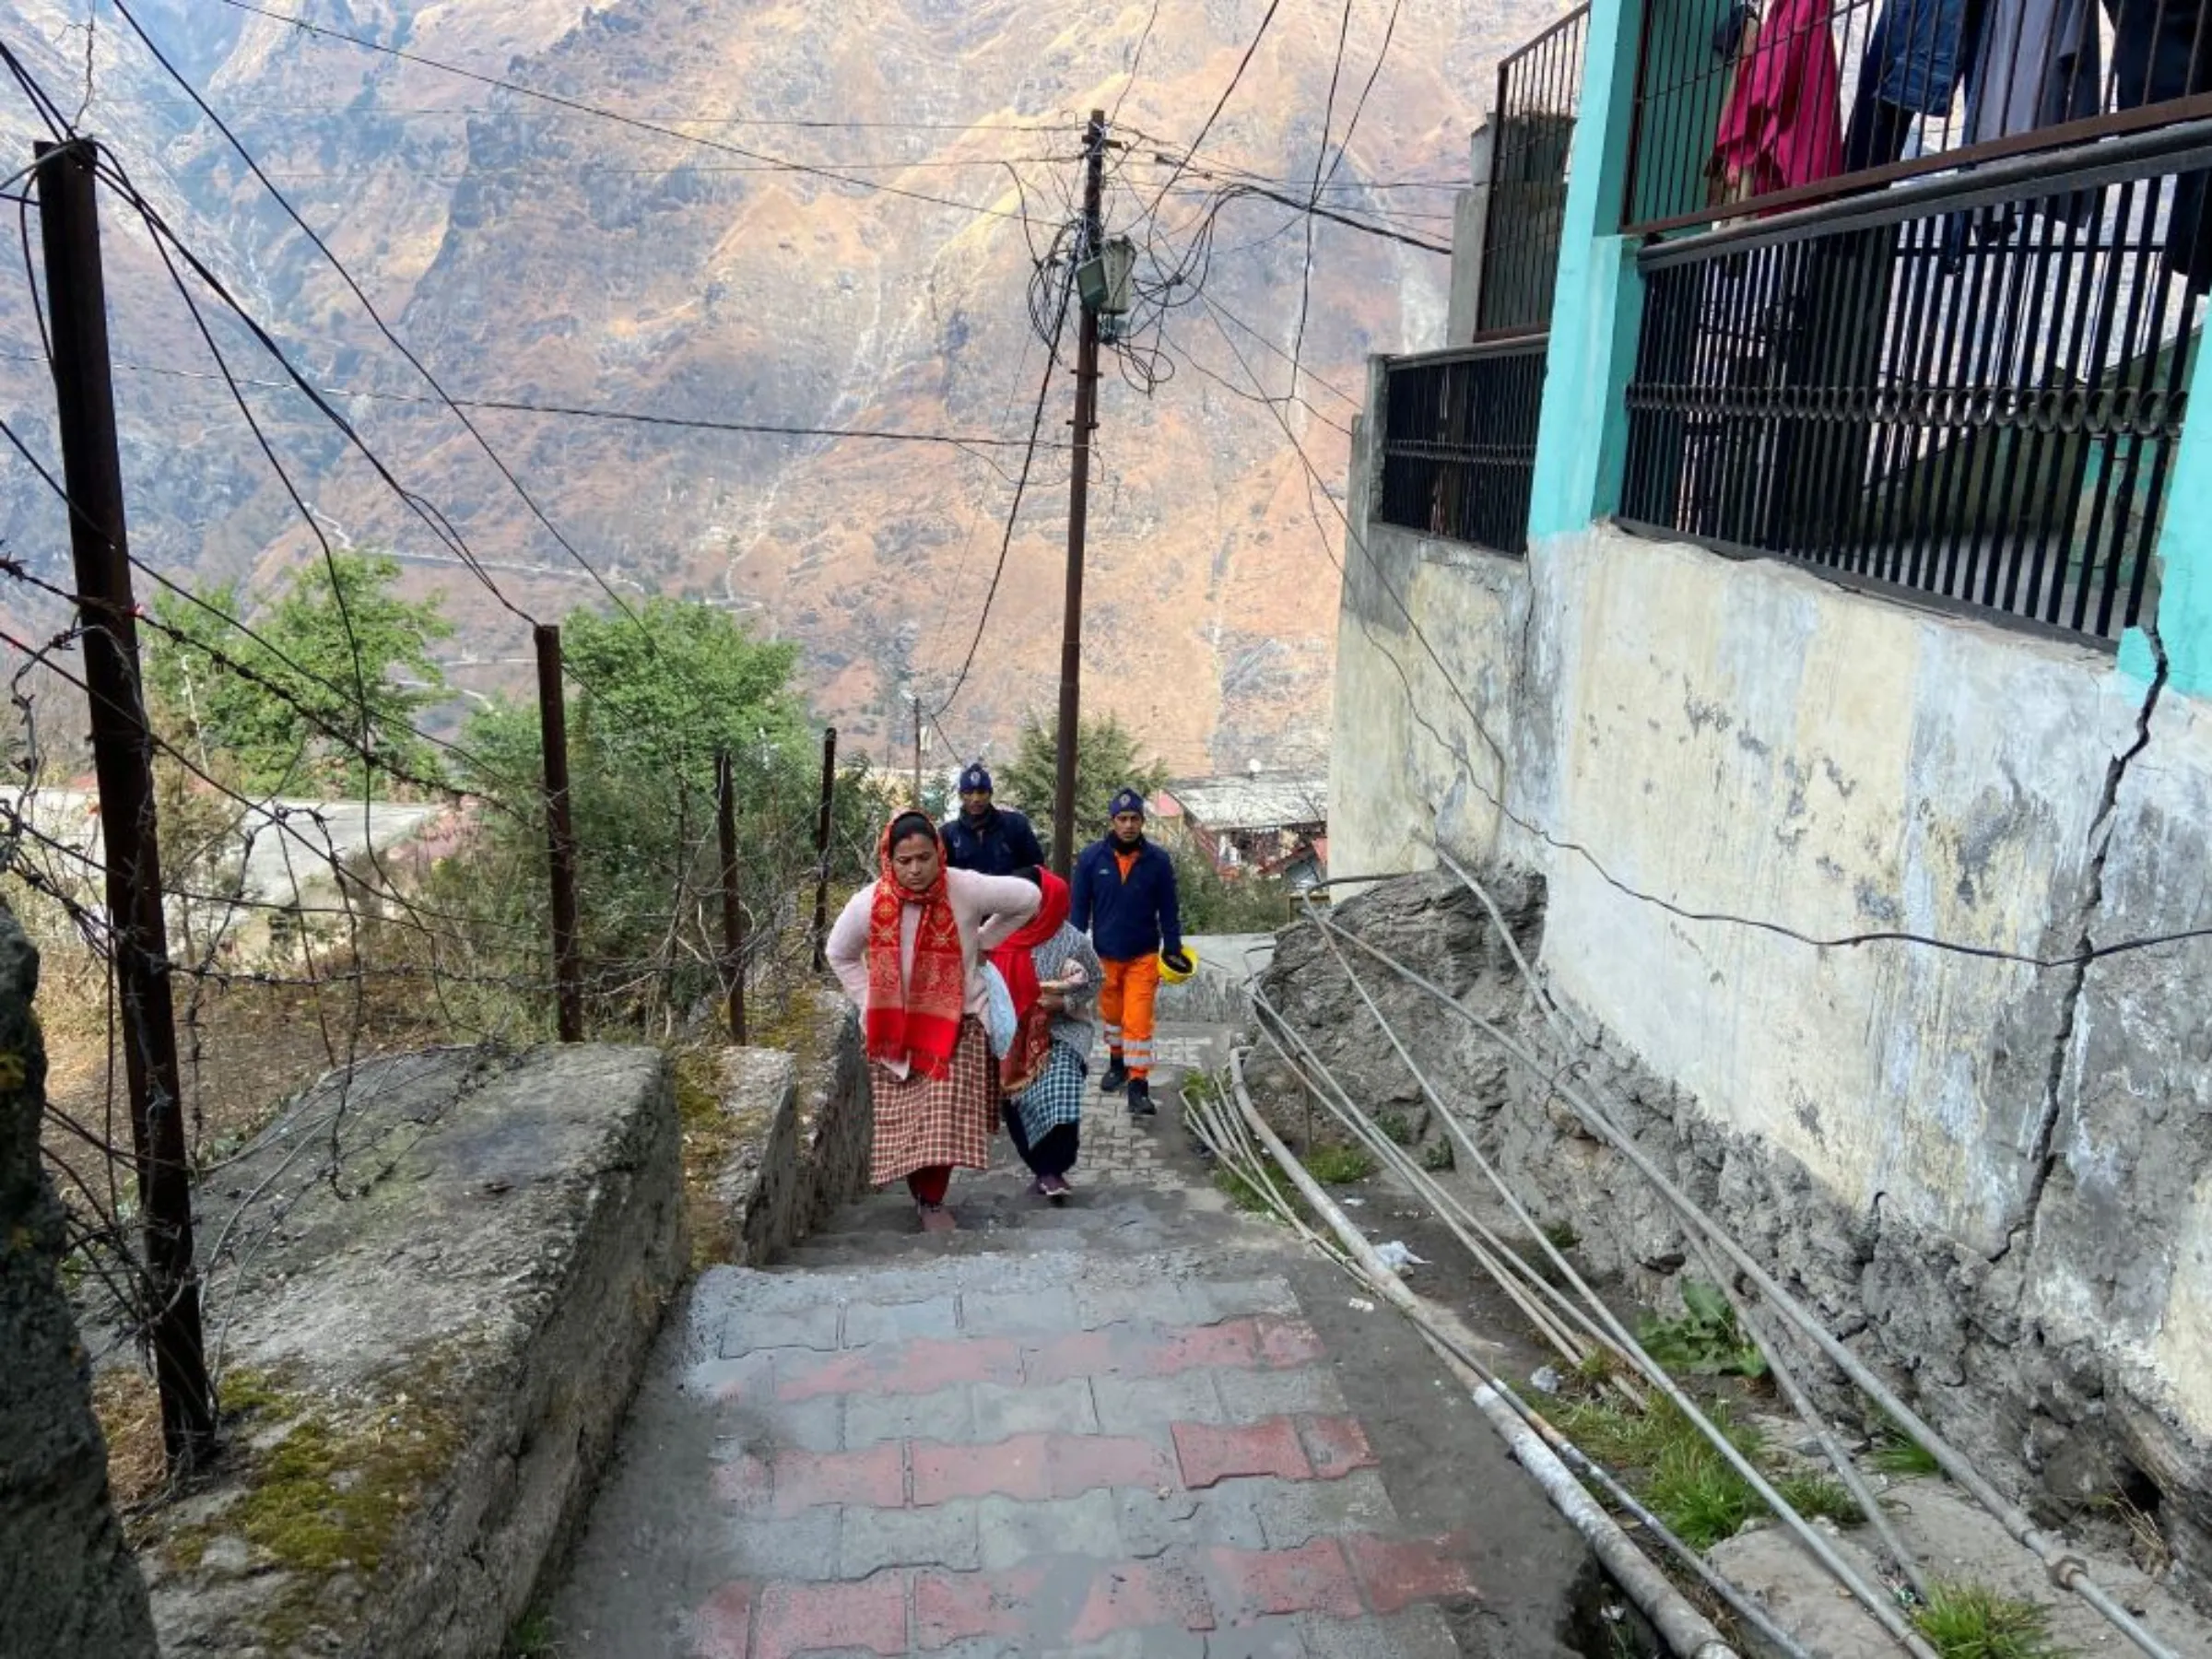 Personnel from disaster response brought in for evacuations from crumbling buildings walk on the steps of Joshimath, India, January 12, 2023